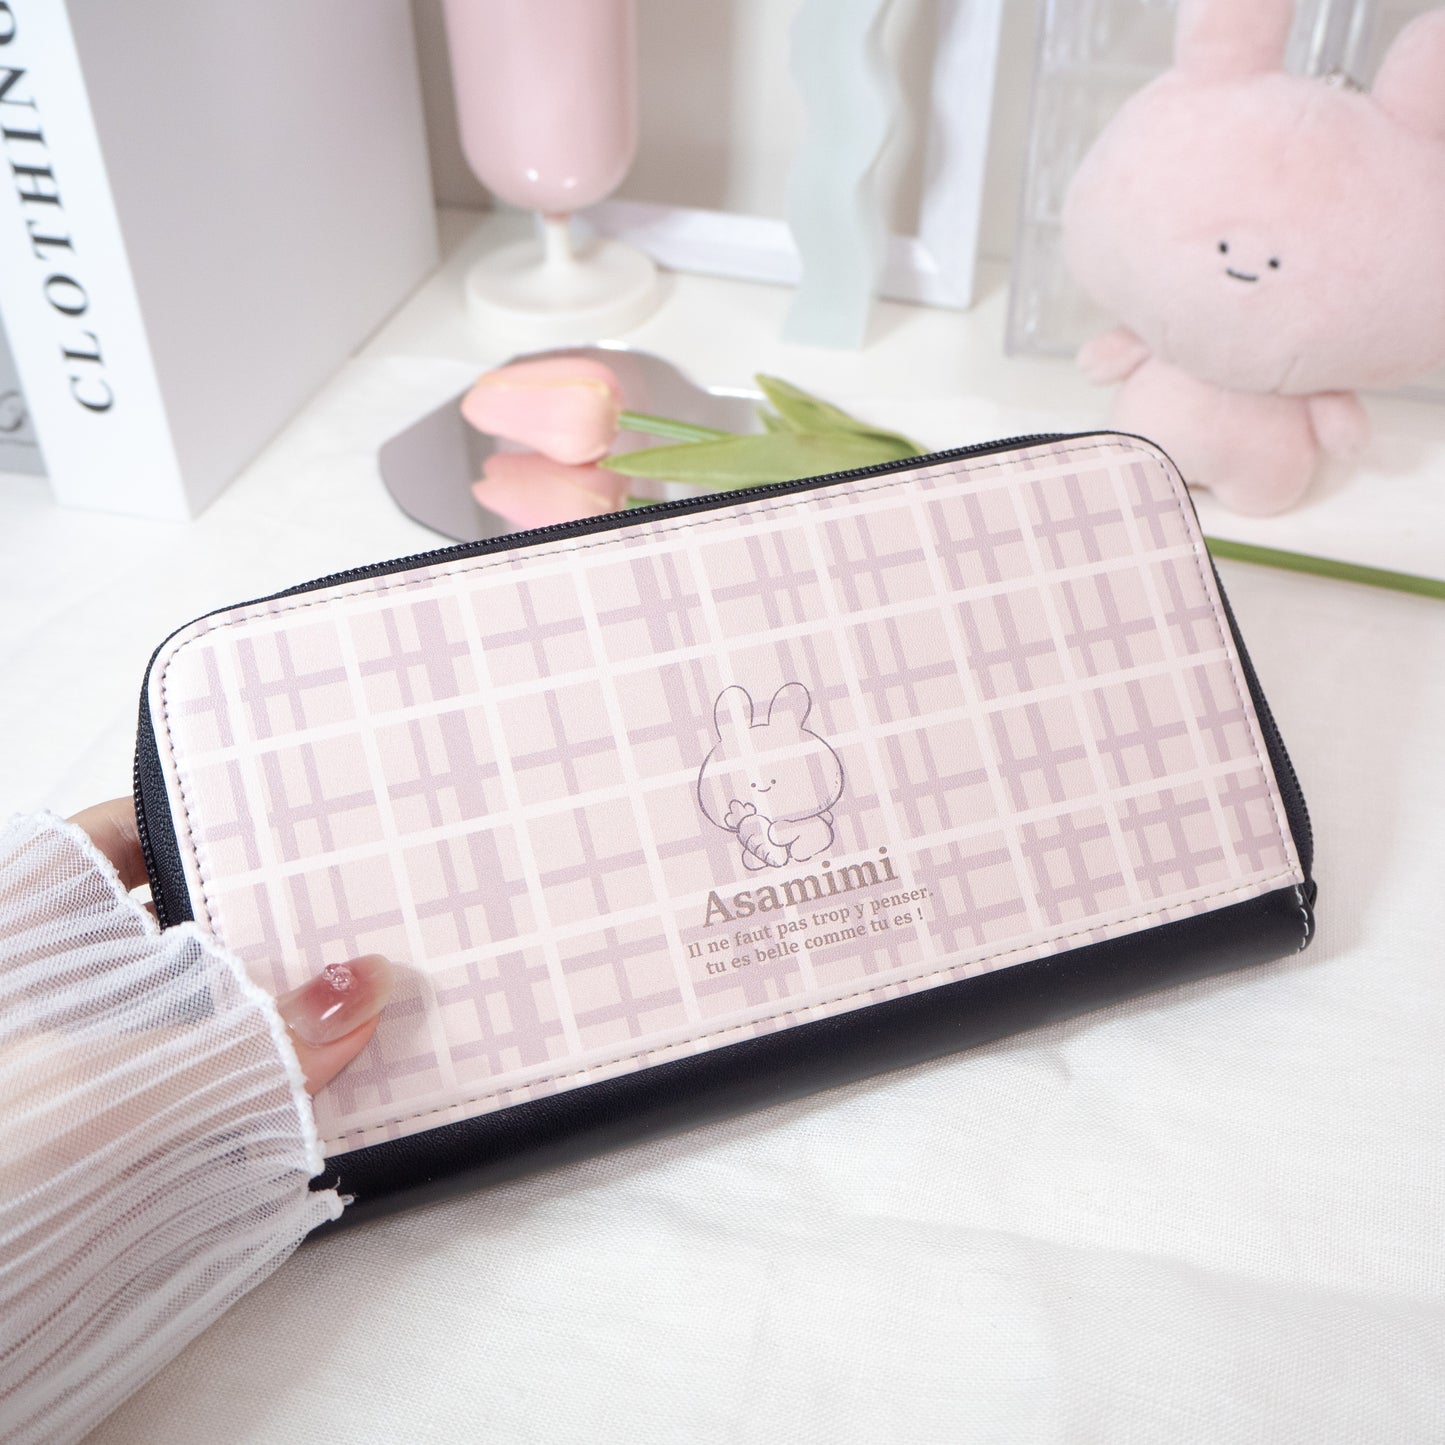 [Asamimi-chan] Long wallet (French girly) [Shipped in early December]